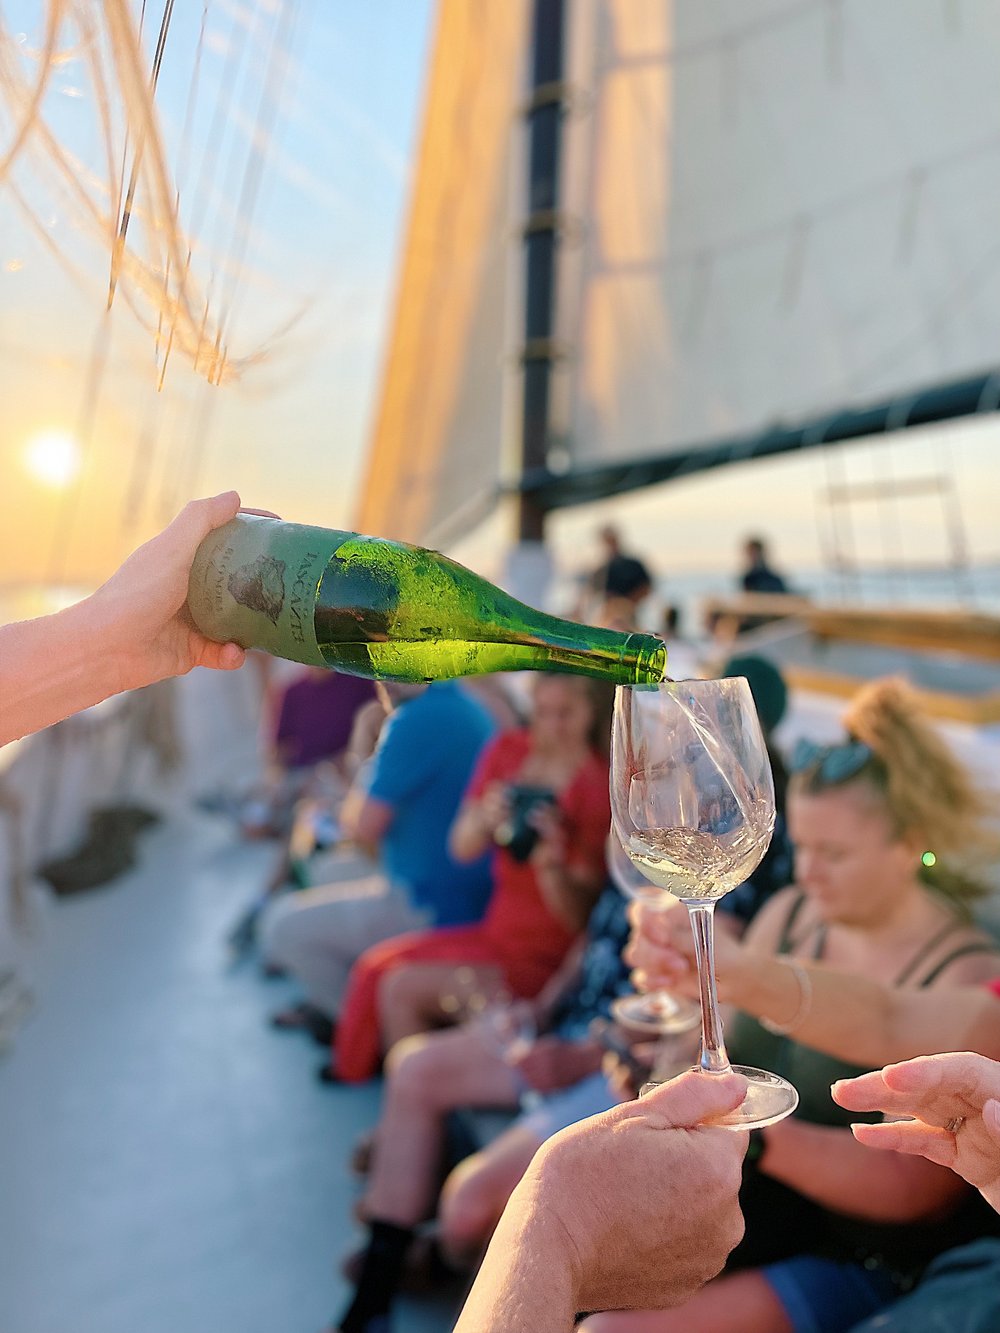 Wine_Sail_Portland_maine_wine_wise_events_Sicily_sicilia_pour_people_mineral_driven_italy.jpeg